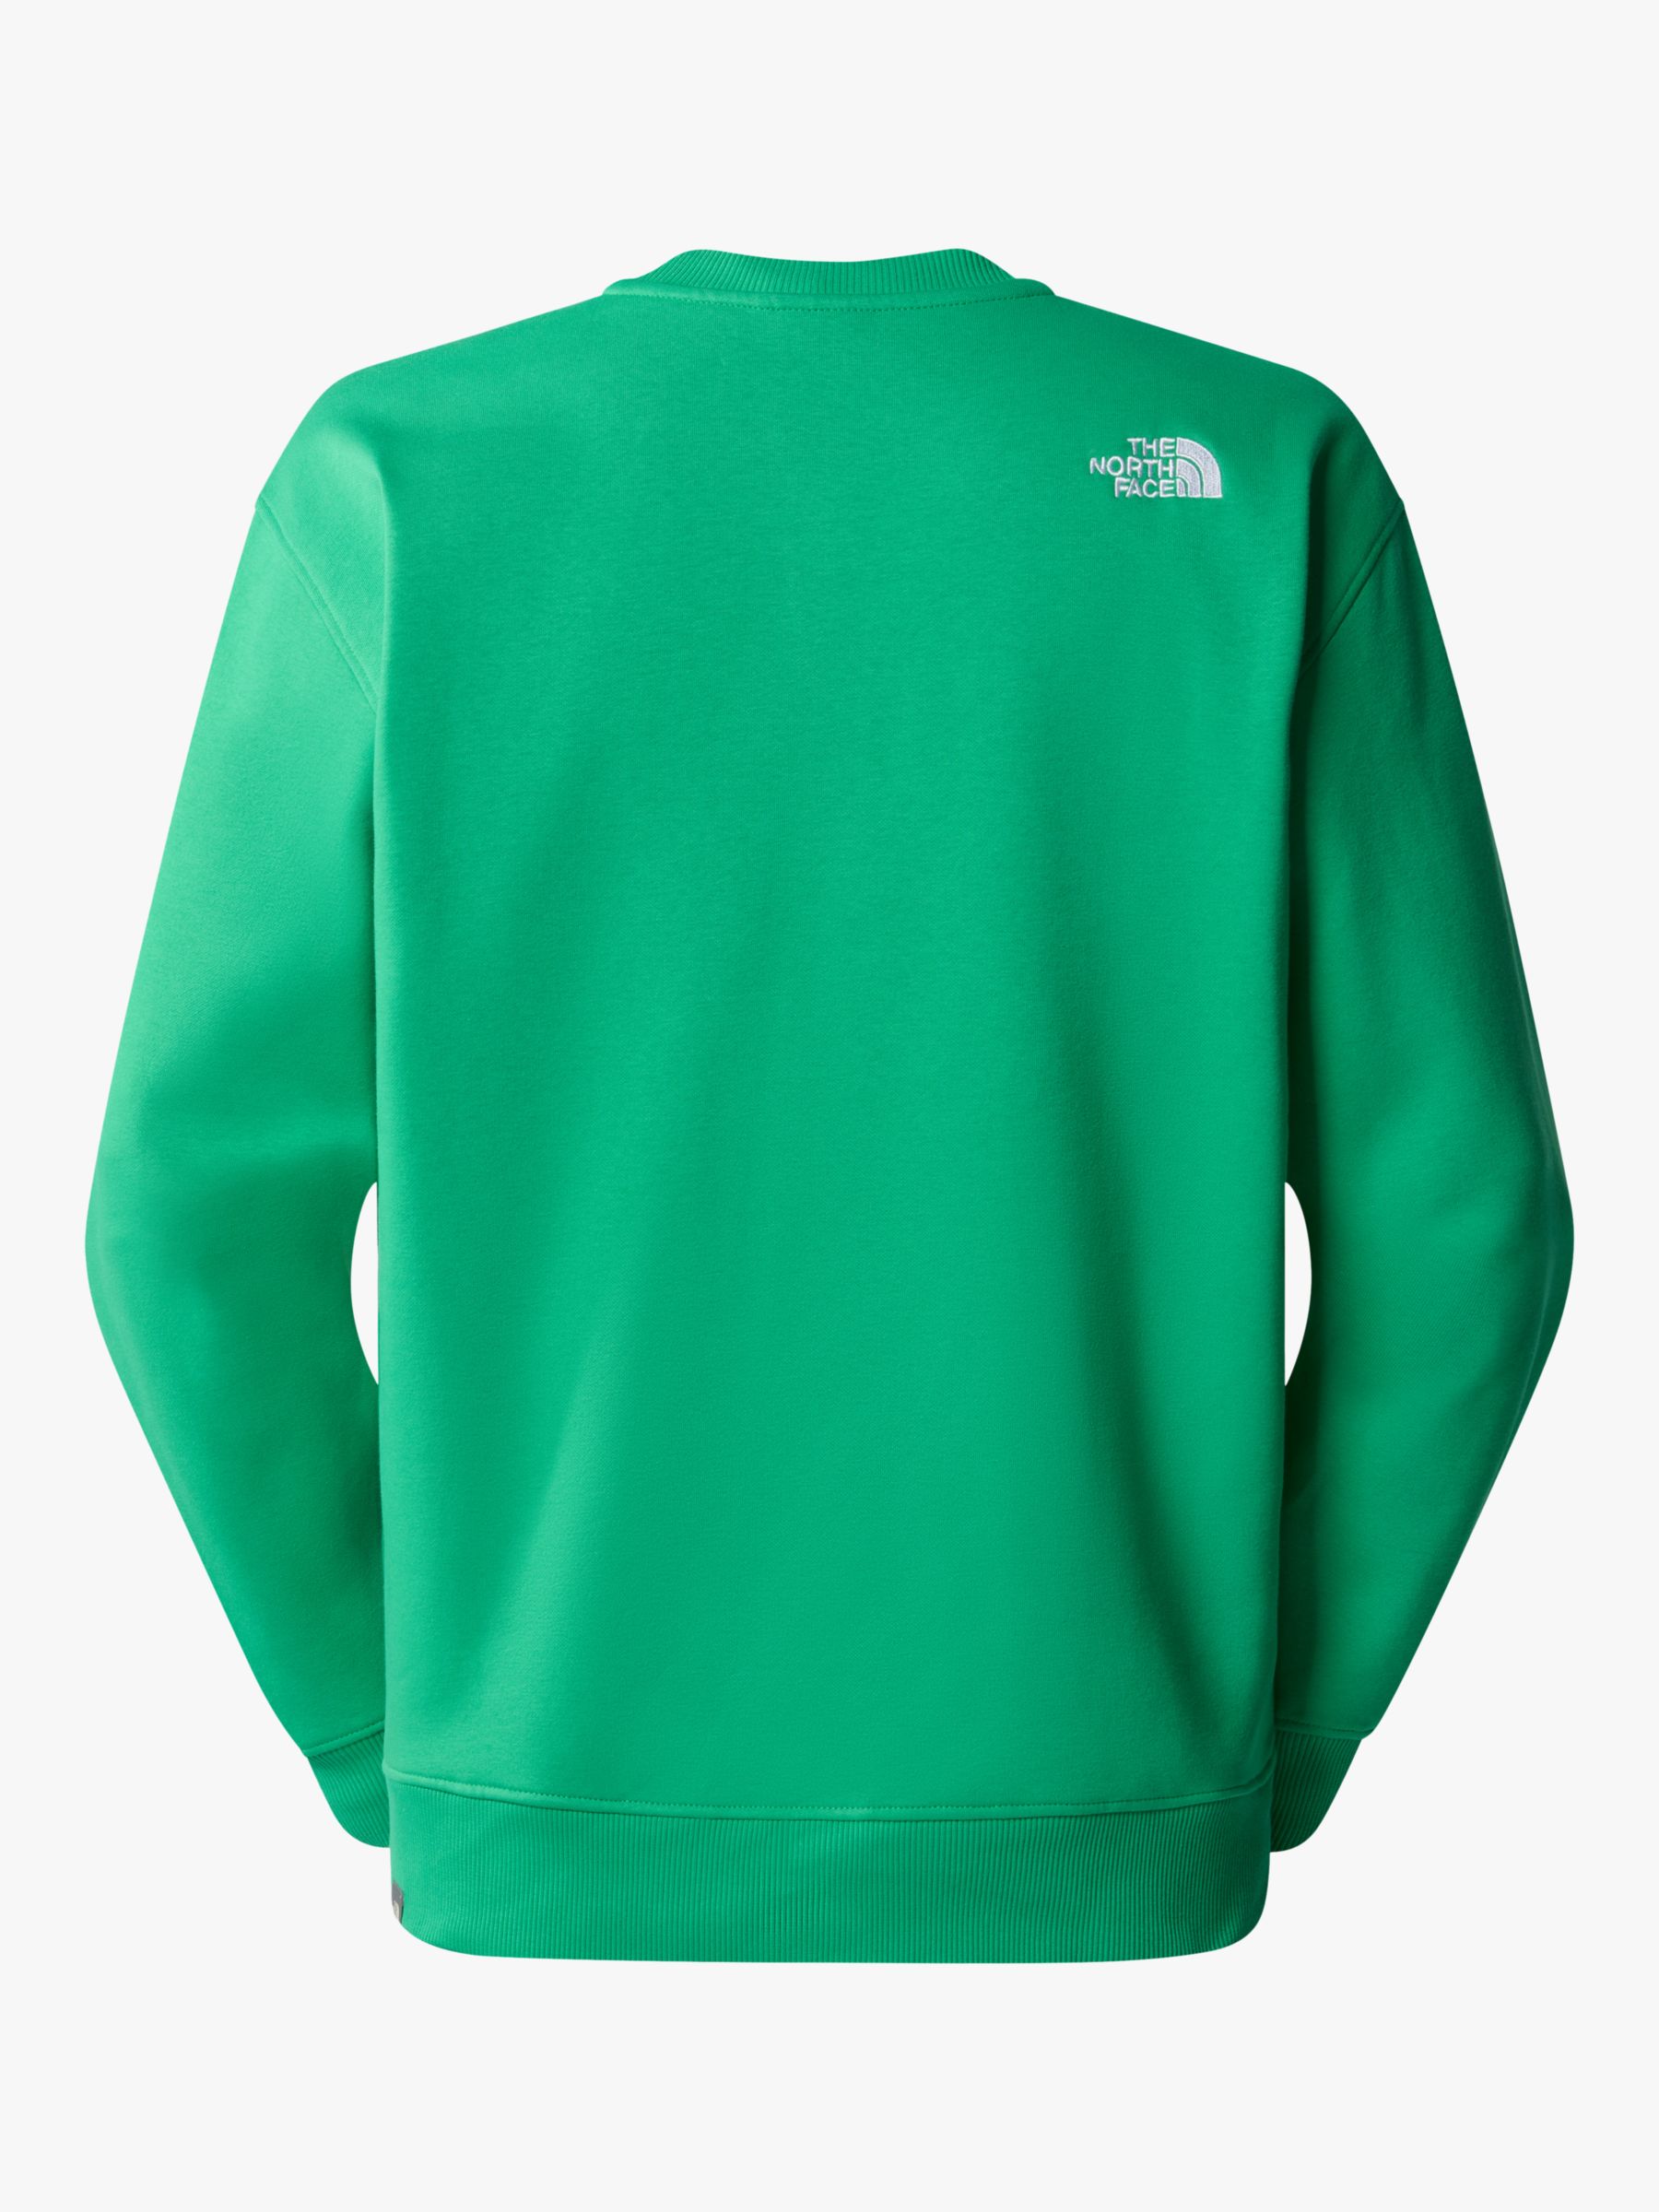 Buy The North Face Essential Crew Jumper, Green Online at johnlewis.com